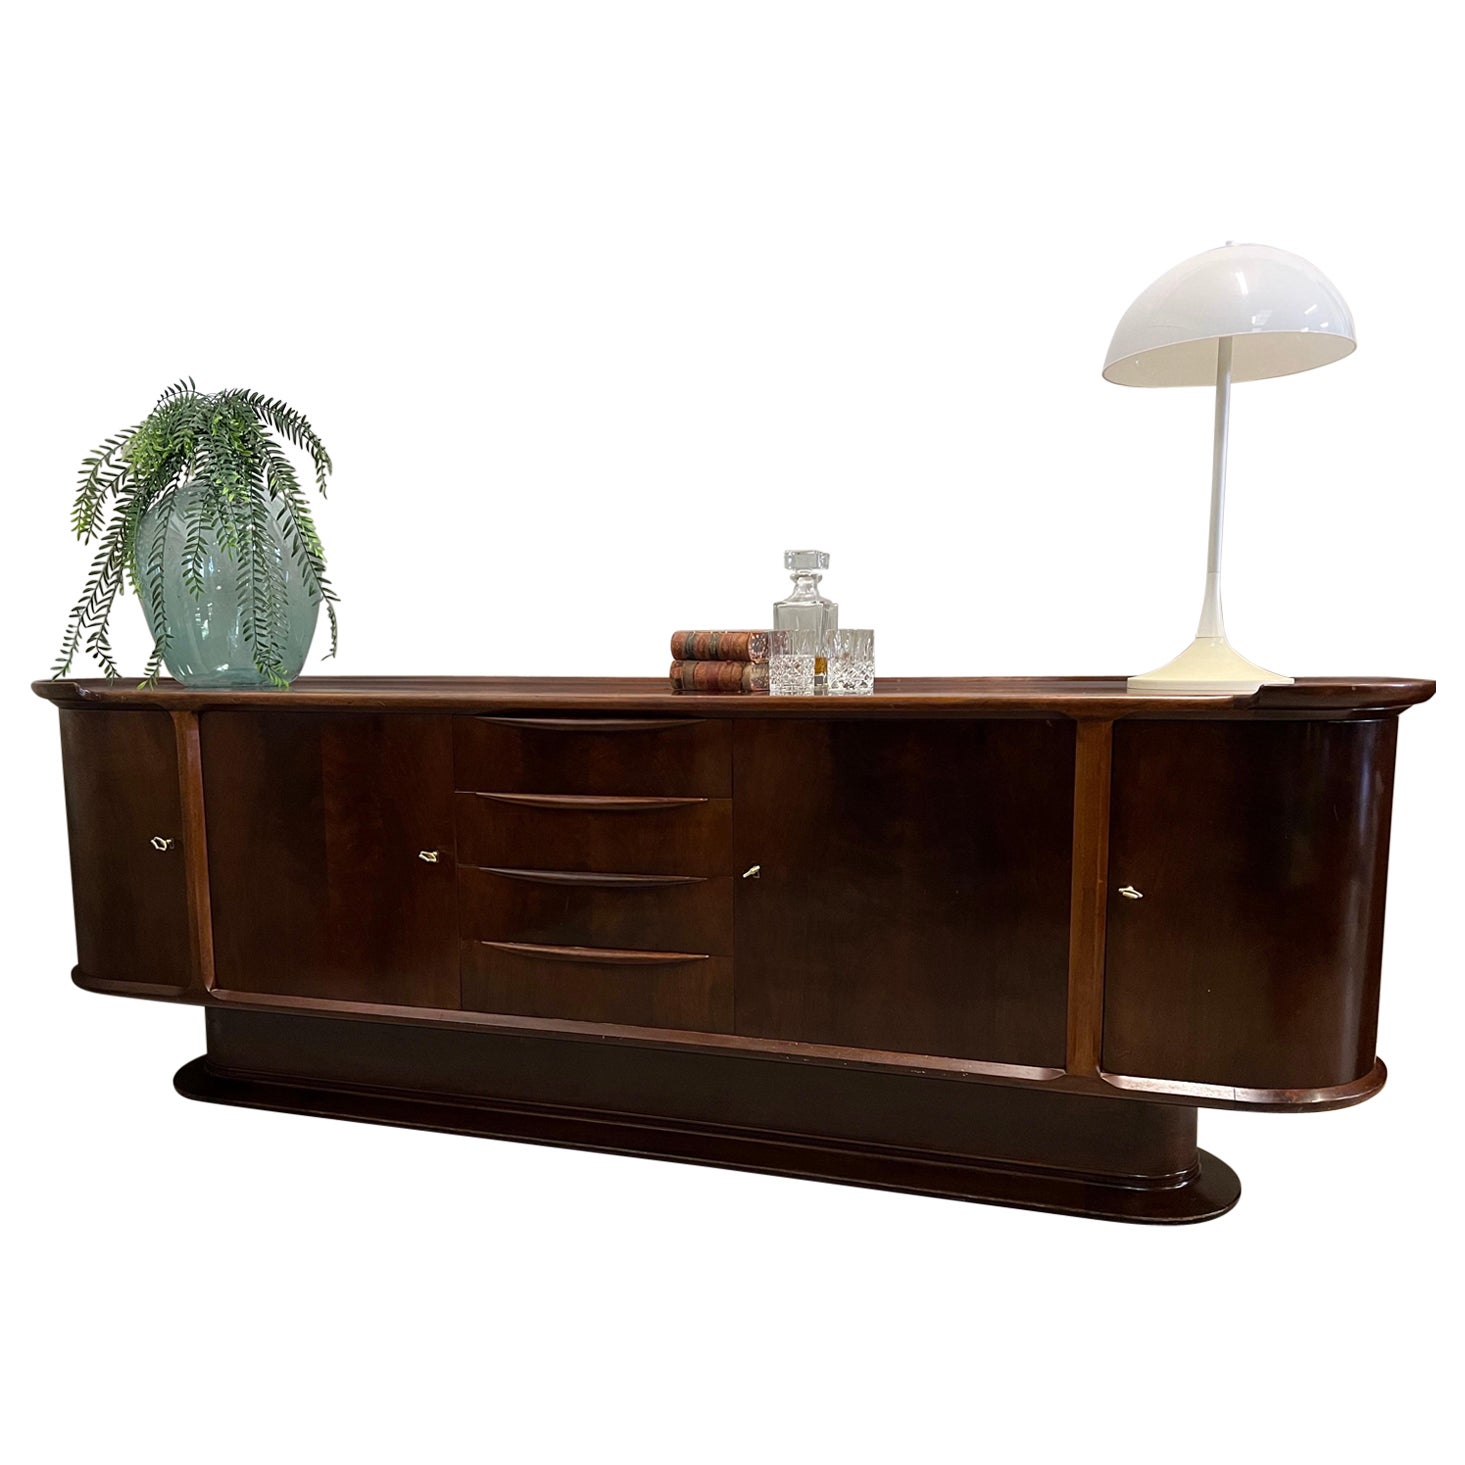 Mid-20th Century, Top Quality A.A. Patijn Sideboard from the 1950s for Zijlstra